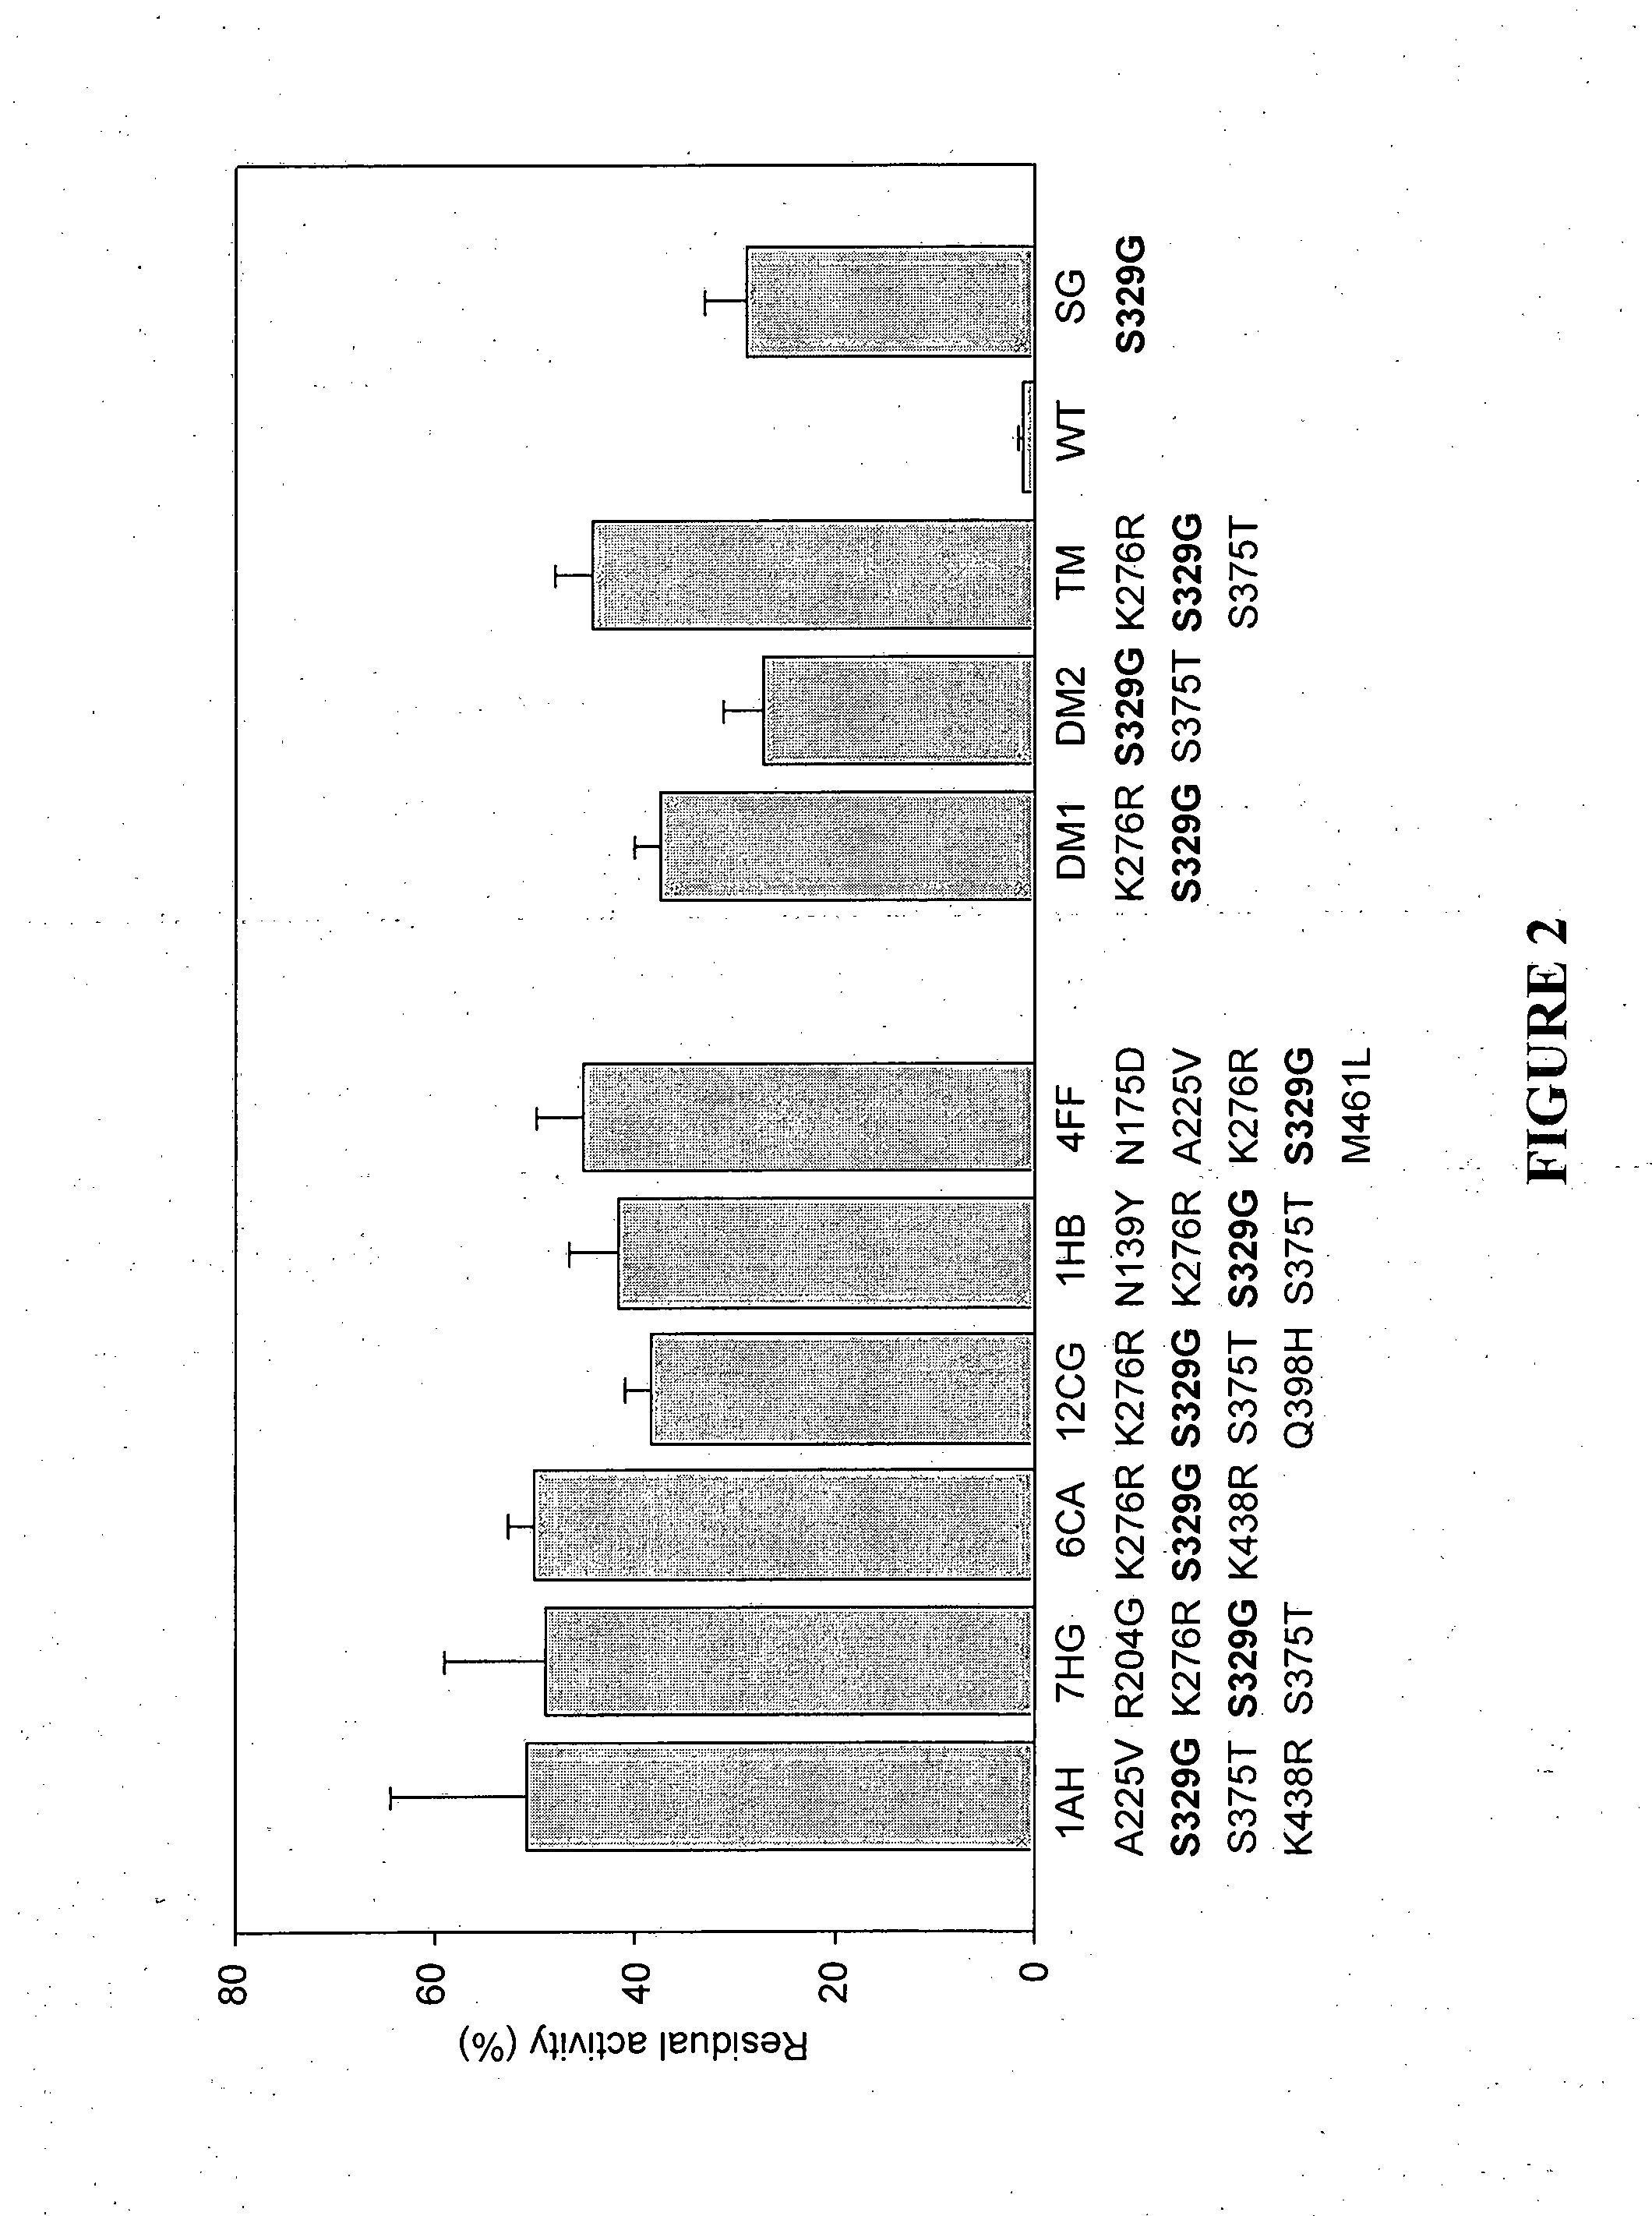 Modified cellulases with enhanced thermostability